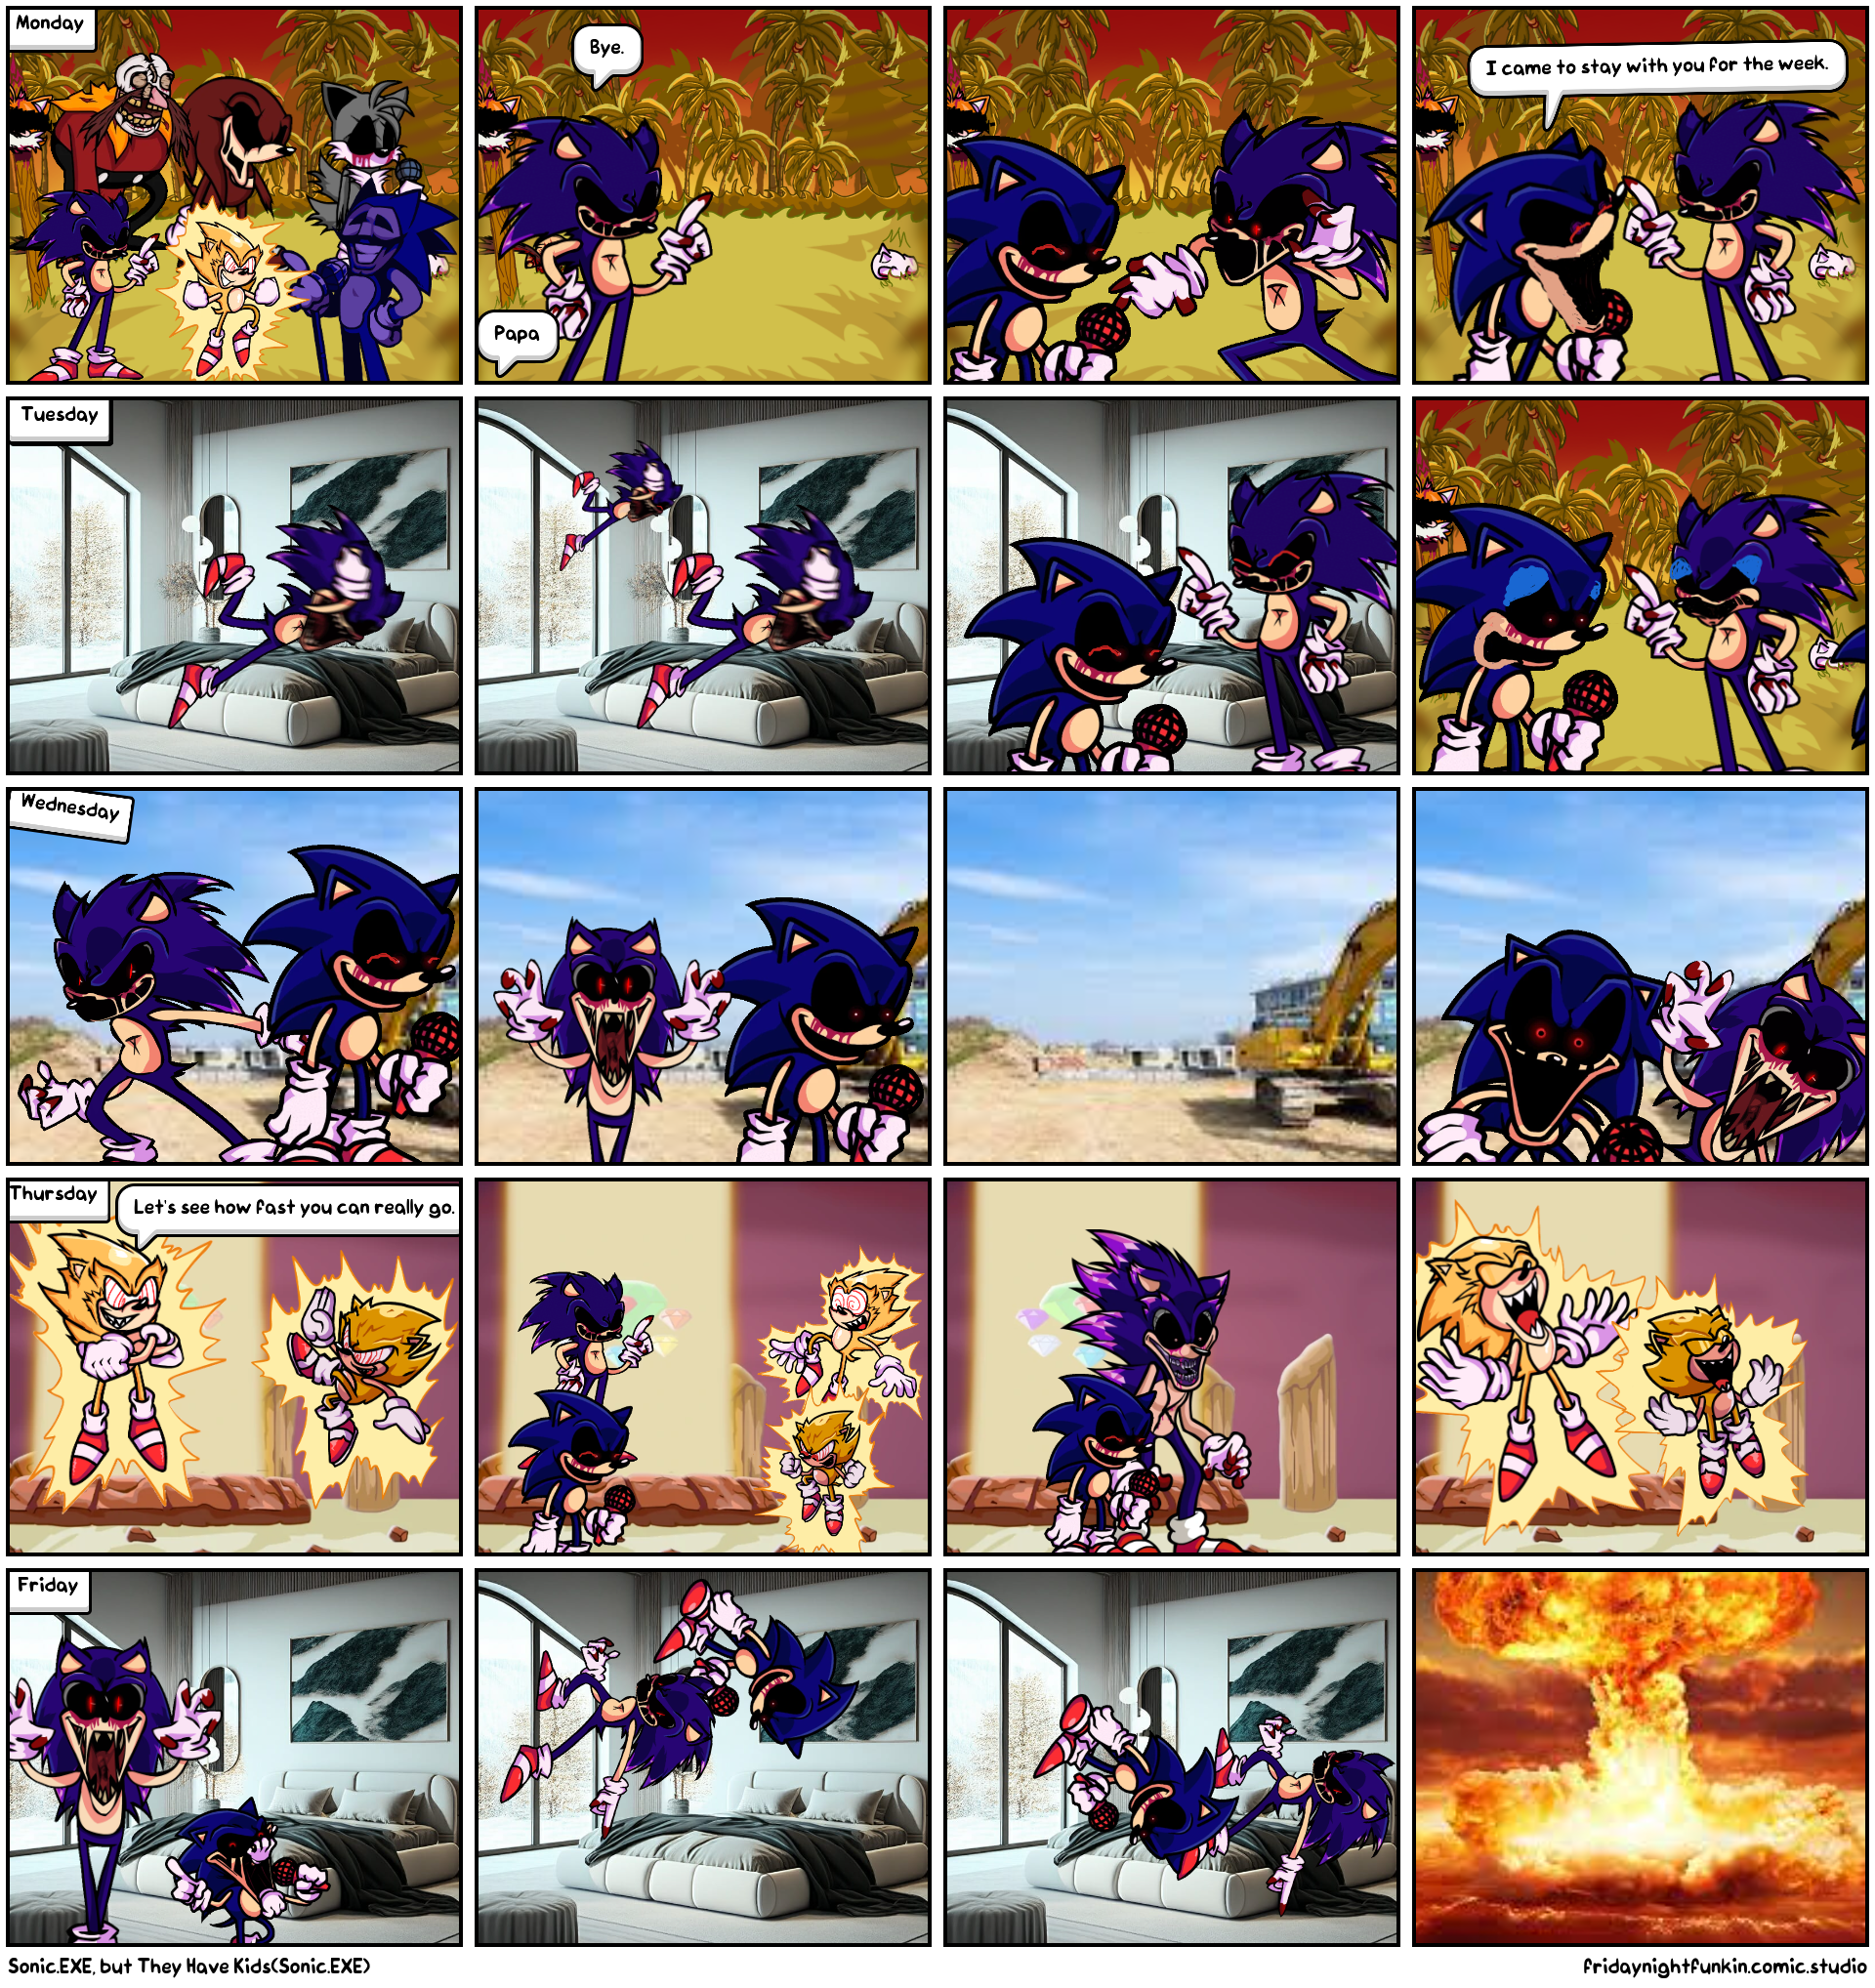 2 Songs but Sonic.EXE took the spot of Xenophanes - Comic Studio